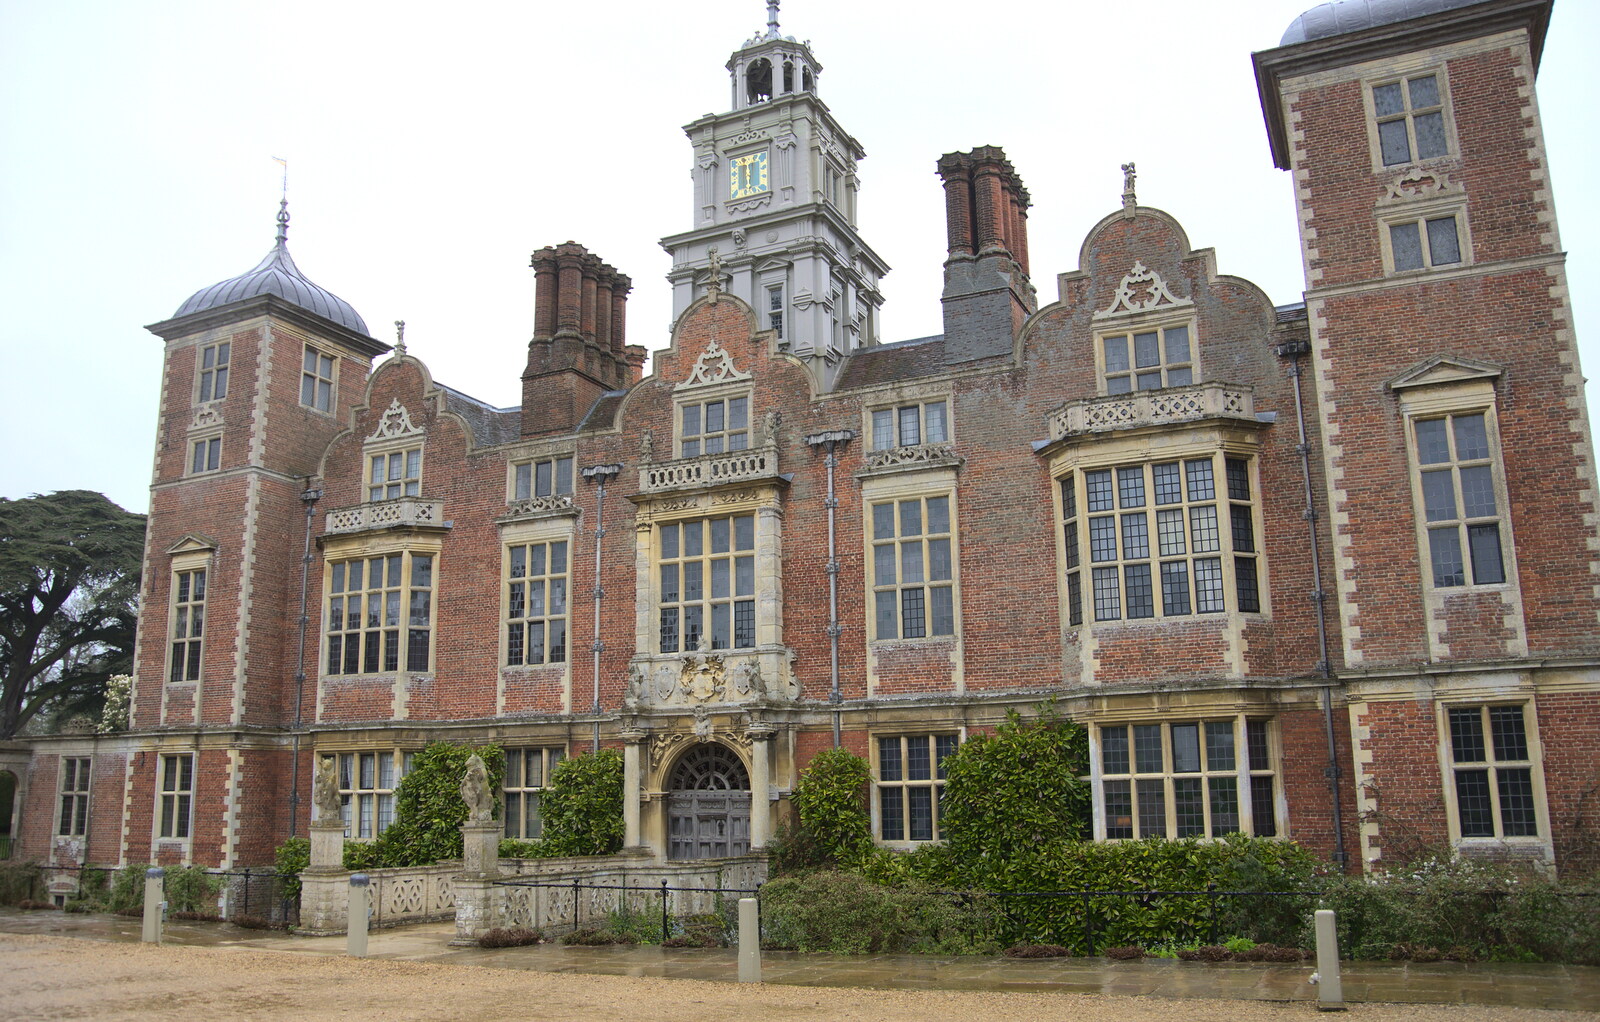 The grand frontage of Blickling from A Trip to Blickling Hall, Aylsham, Norfolk - 29th April 2018